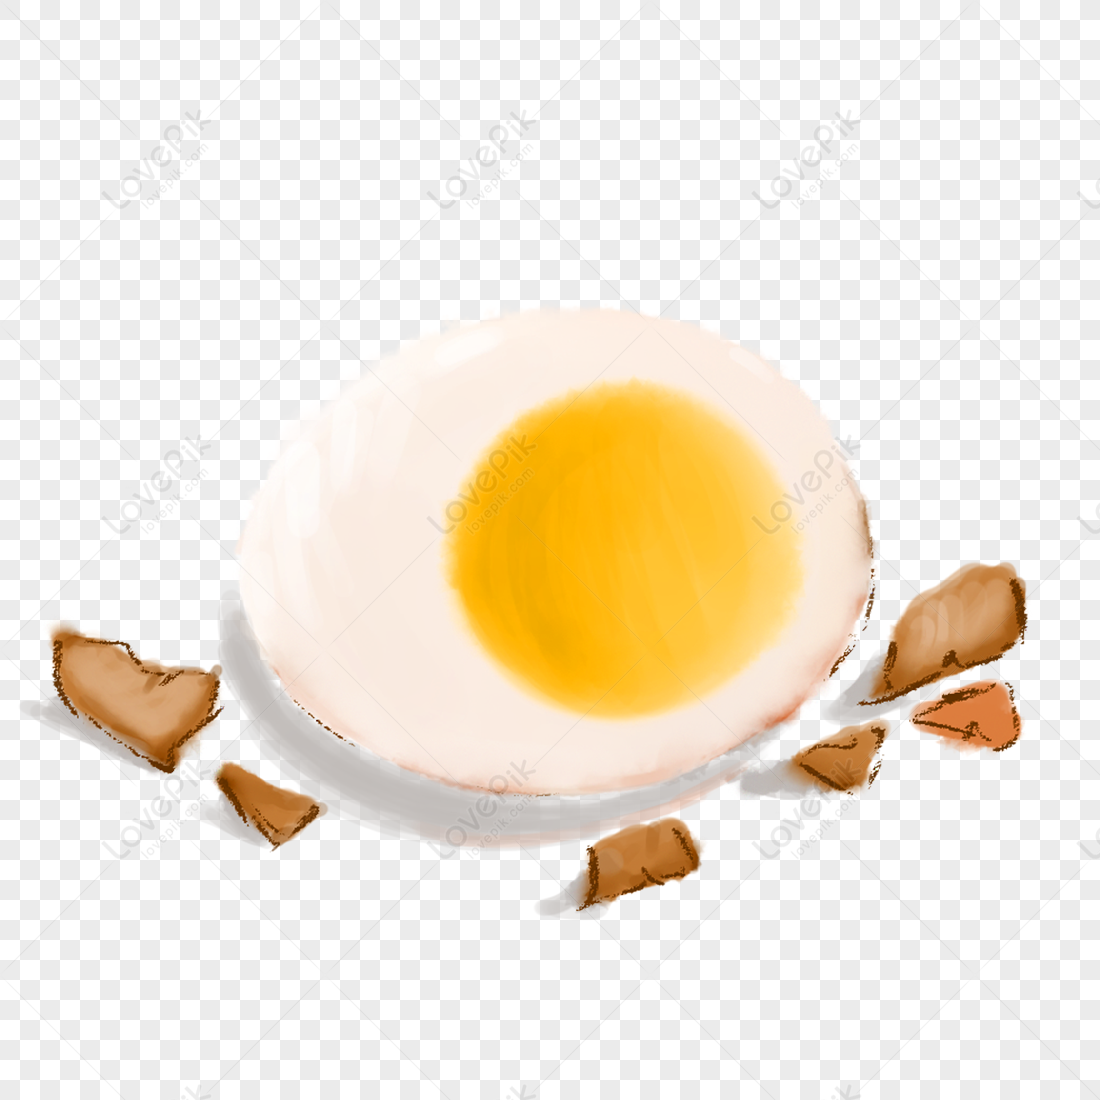 Hard boiled Eggs for breakfast 3D isolated illustration on a transparent  background . 3D Rendering 31697241 PNG